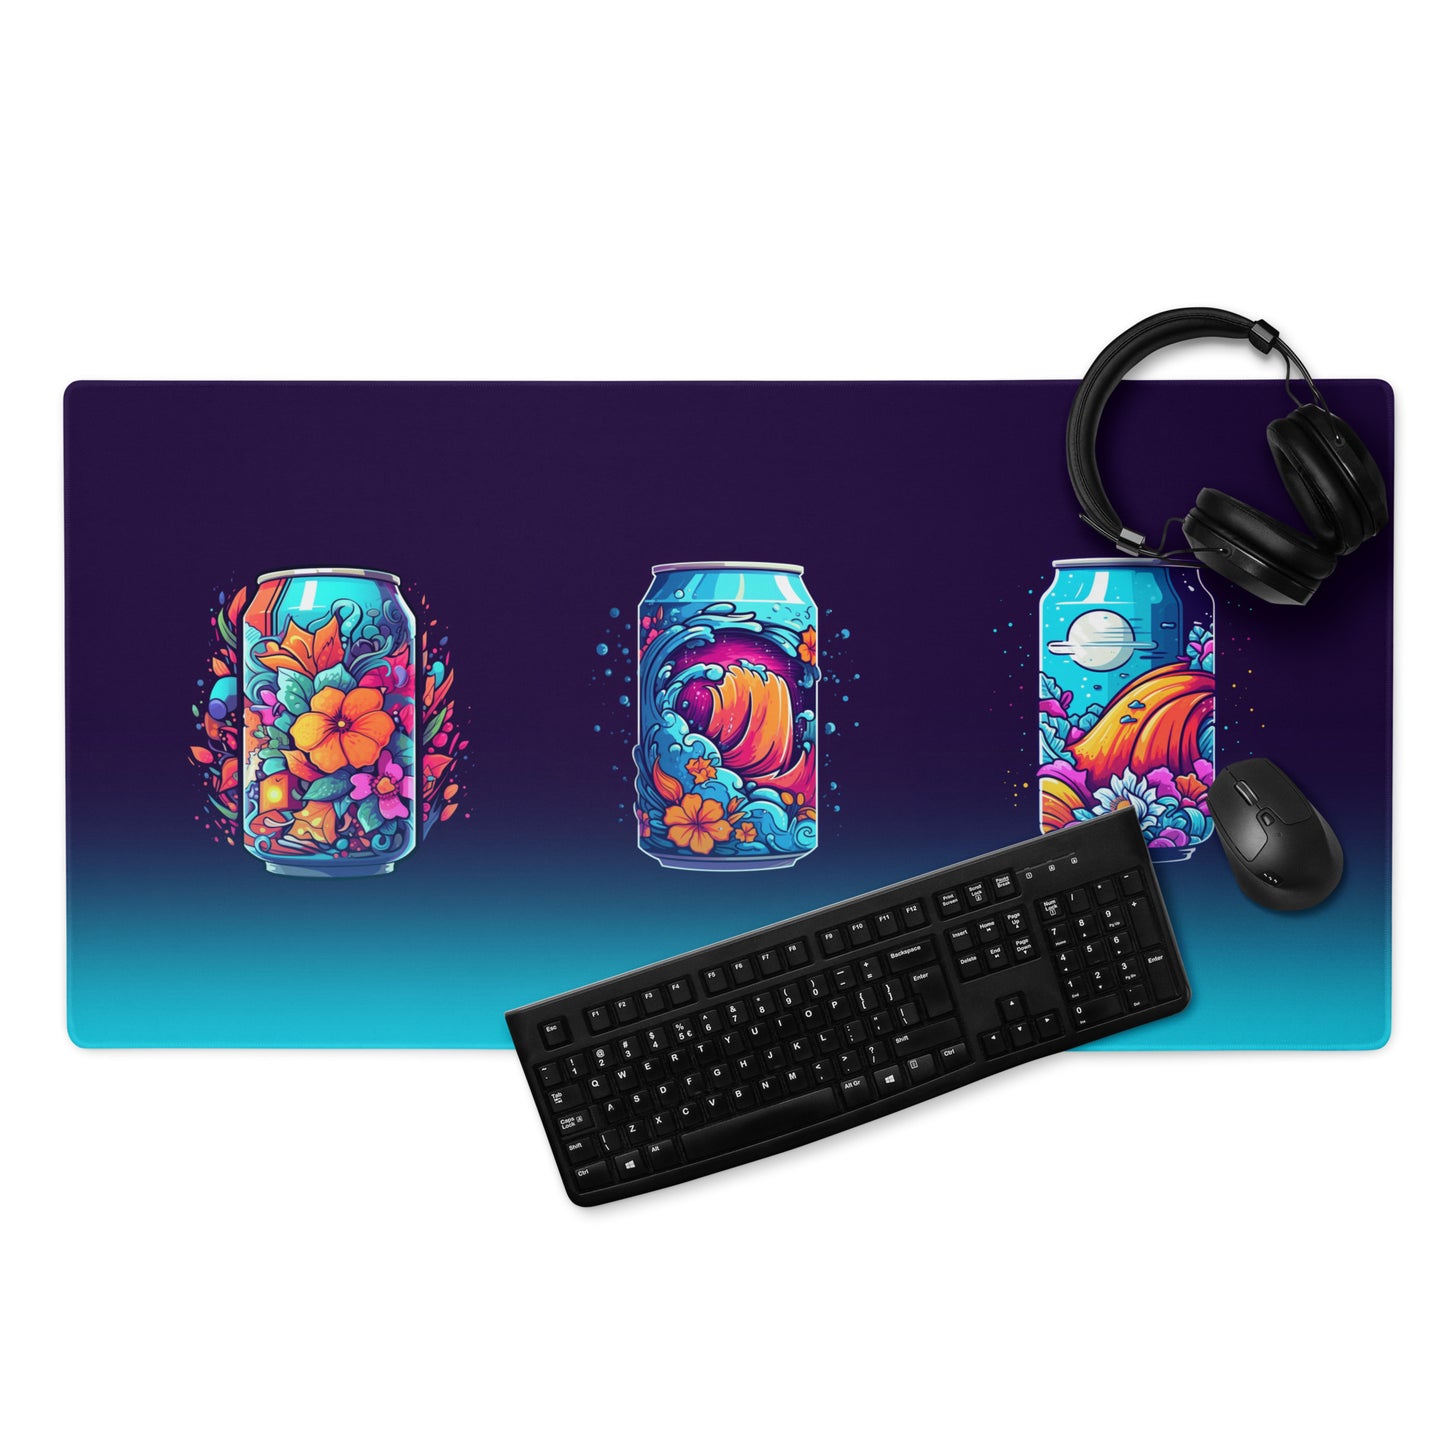 A 36" x 18" desk pad three soda cans that have a floral, wave, or space design. With a keyboard, mouse, and headphones sitting on it.